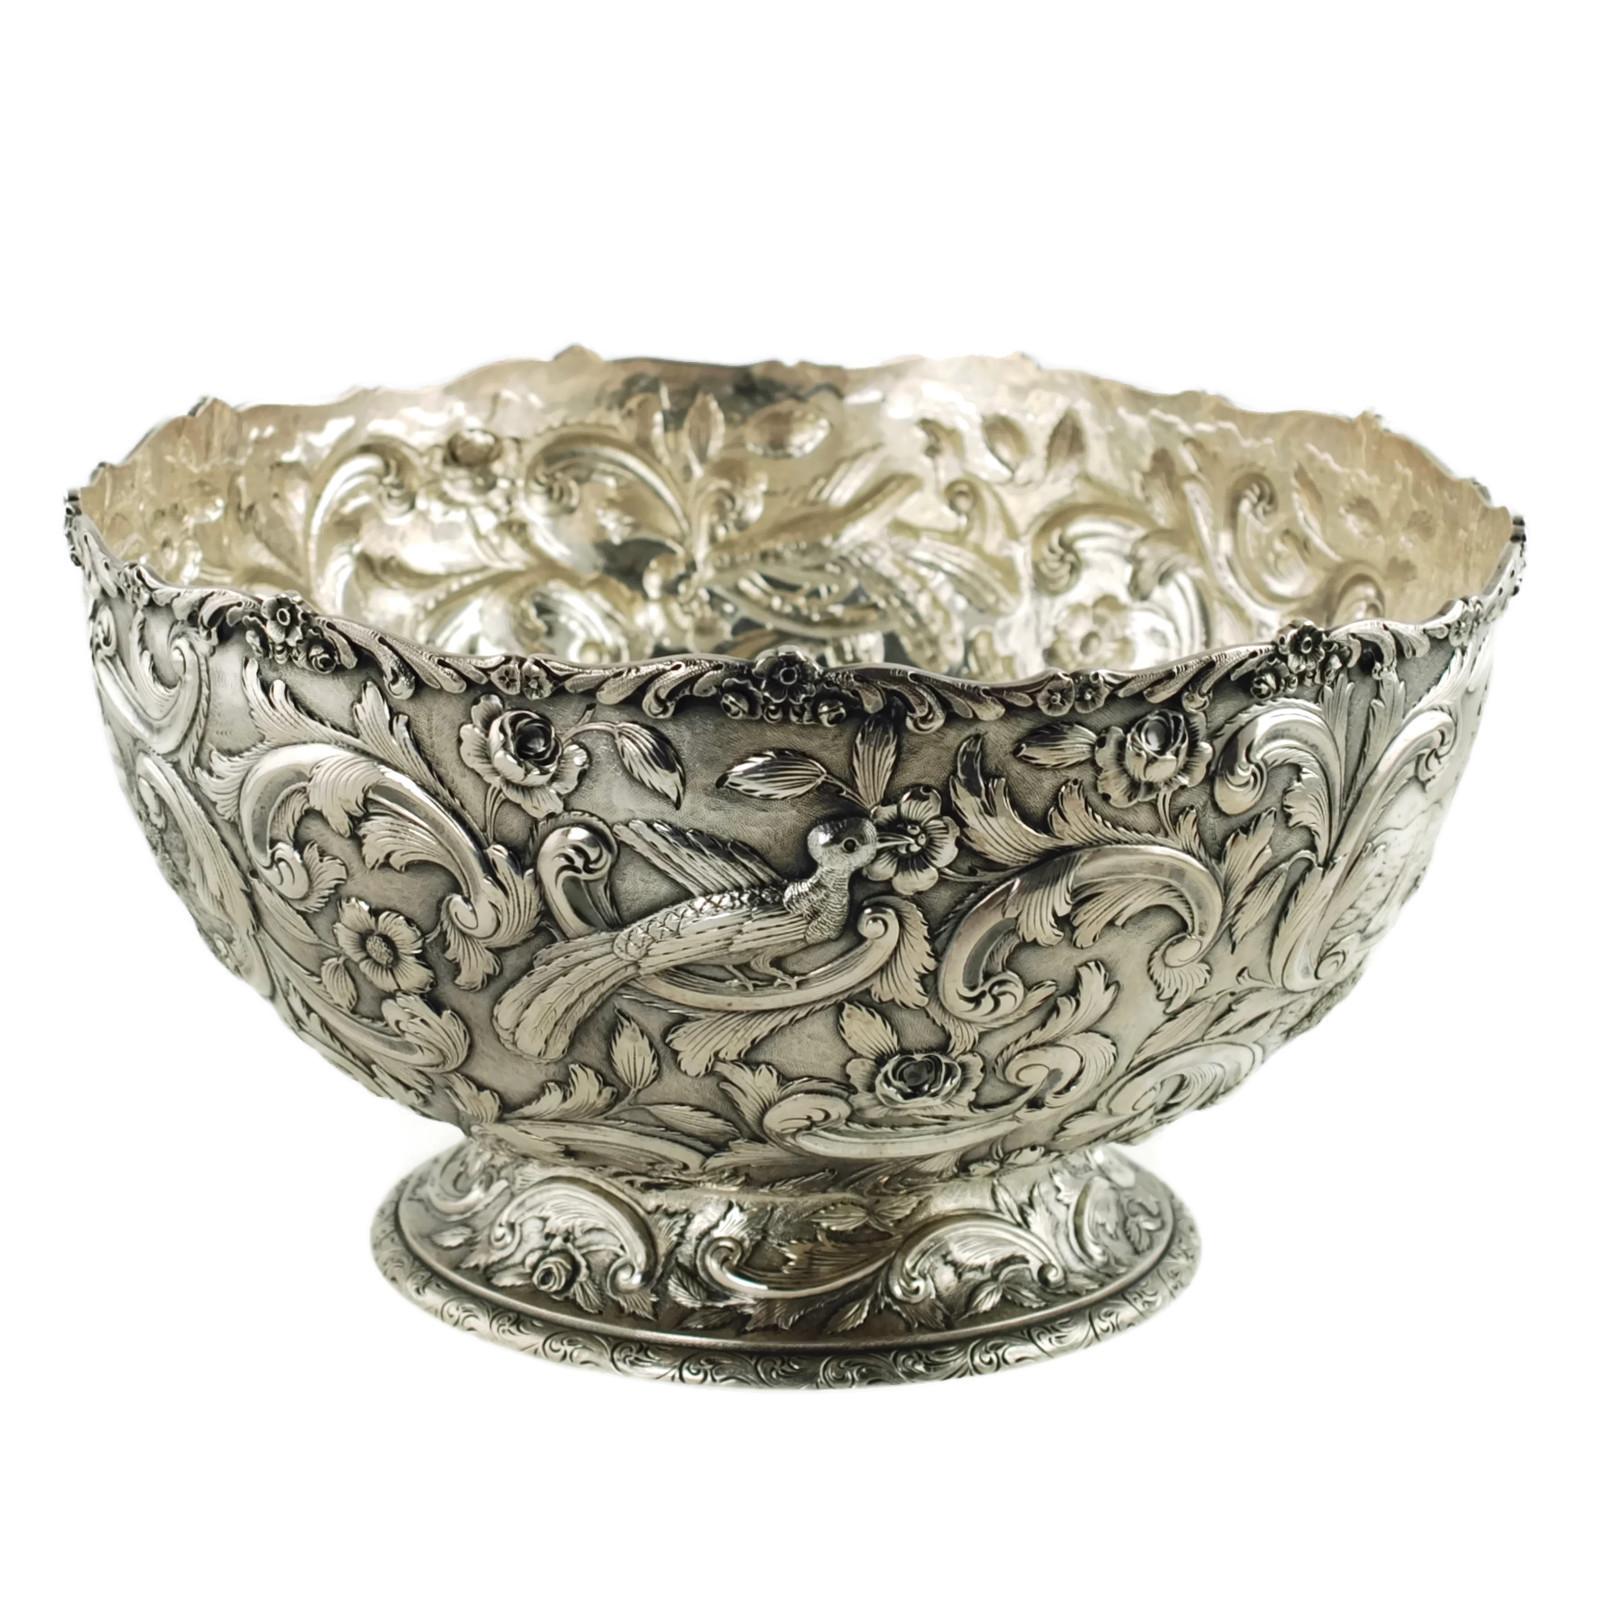 This large ornate early 20th century sterling silver footed punch bowl has been made in the Castle pattern and was retailed by The Loring Andrews Company of Cincinnati. The footed bowl features highly detailed all-over repoussé decoration which